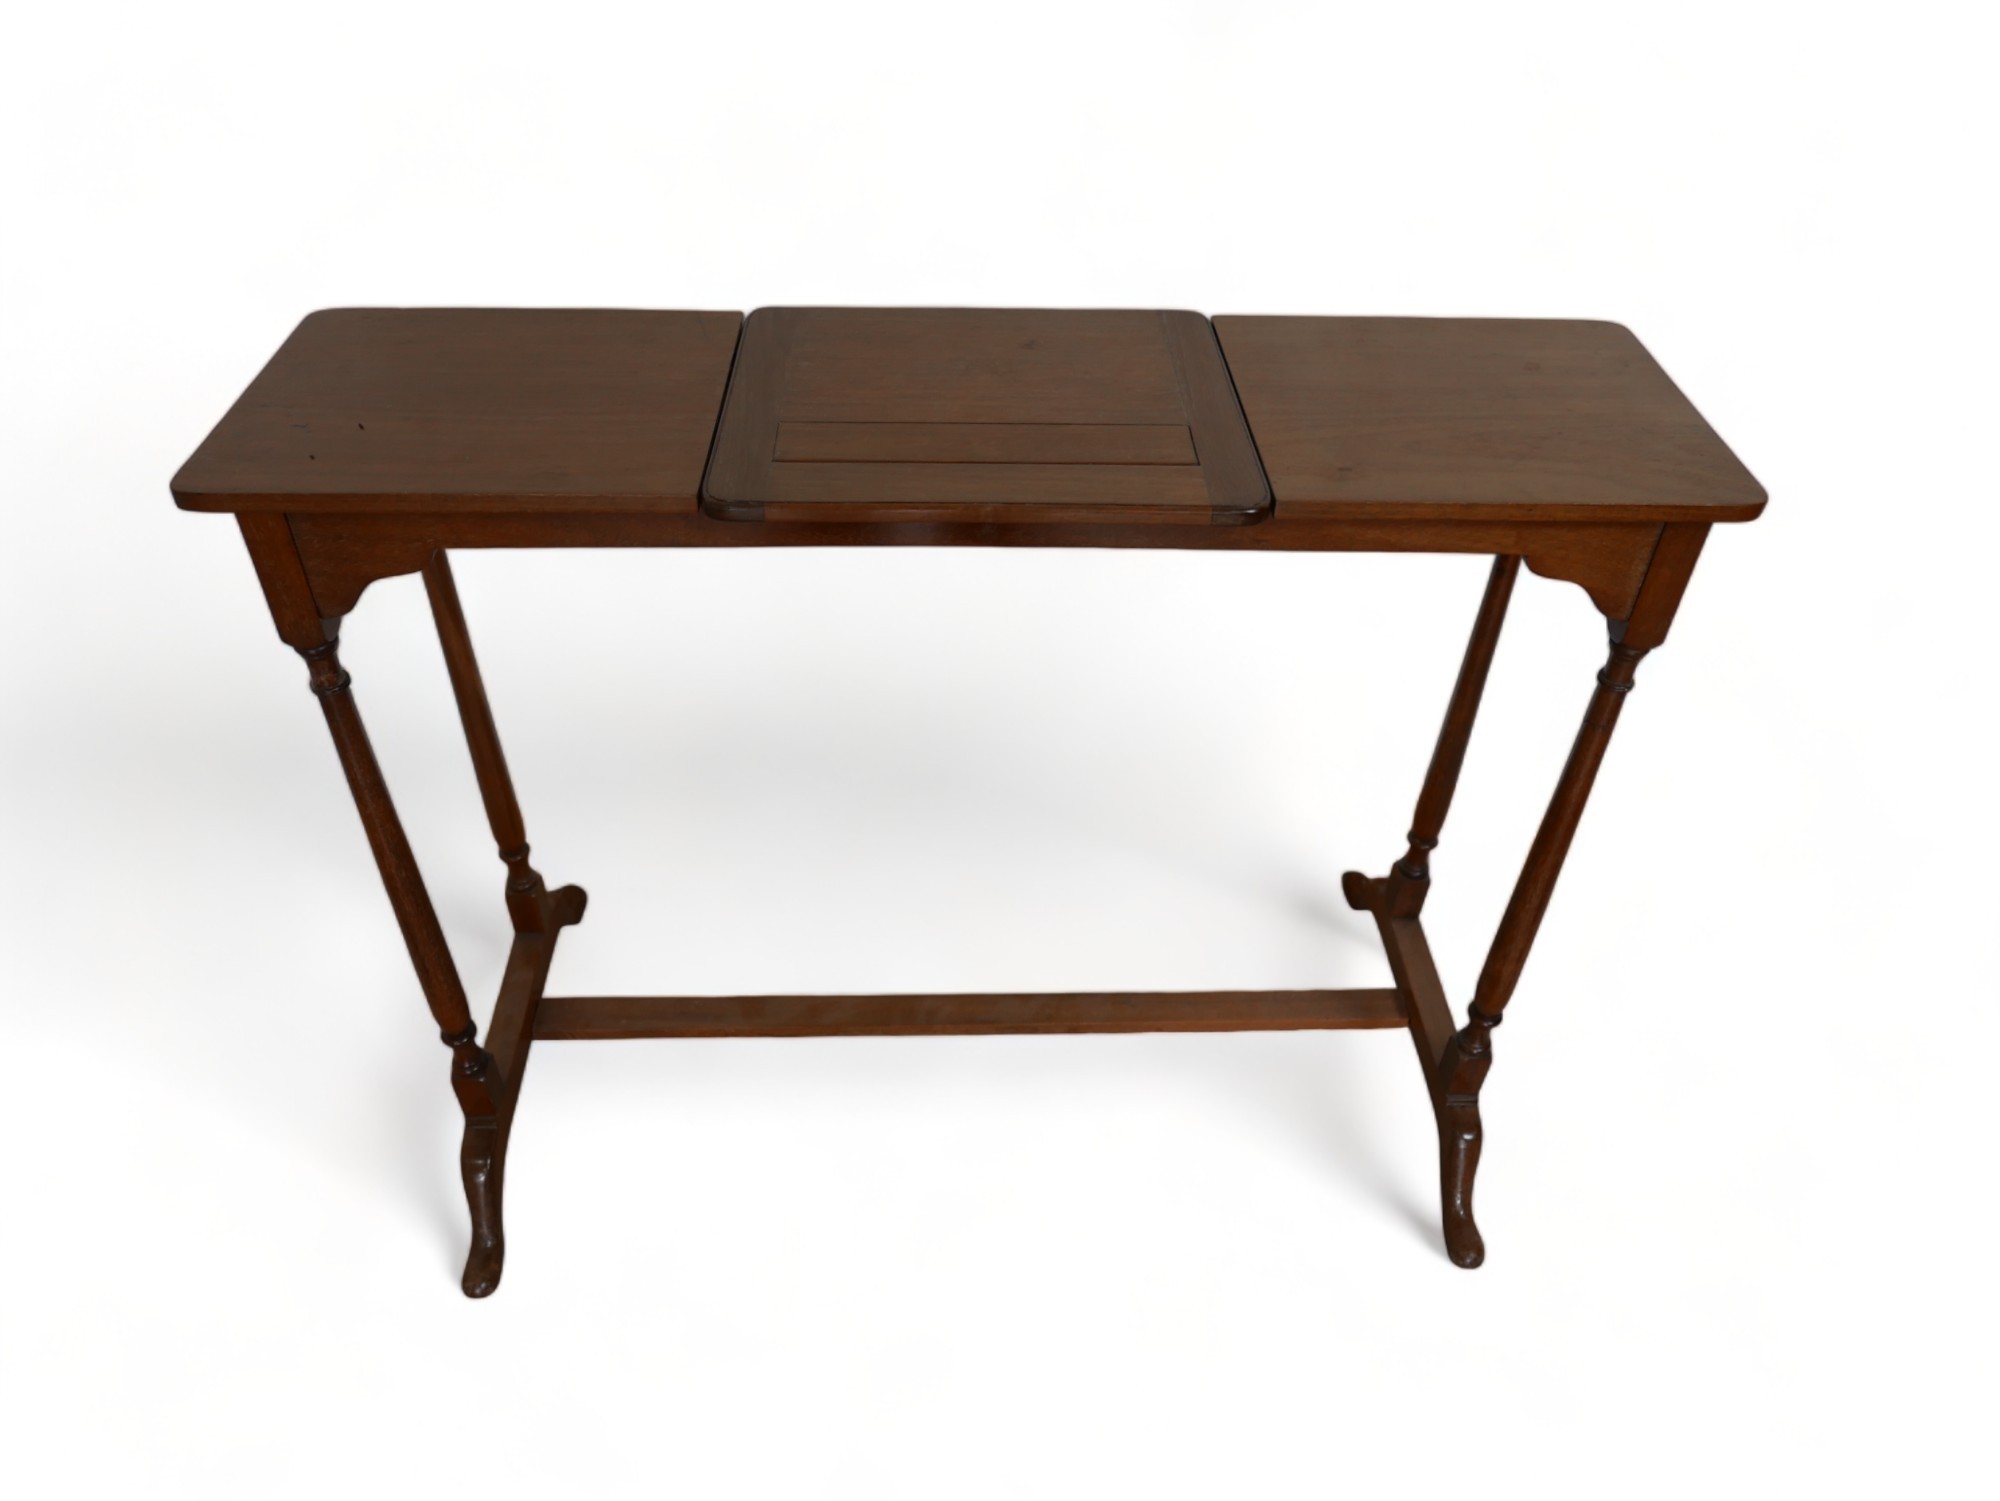 An early 1900s mahogany library reading table with a folding bookrest 93.5 by 46.5 by 68.5cm tall. - Image 4 of 11